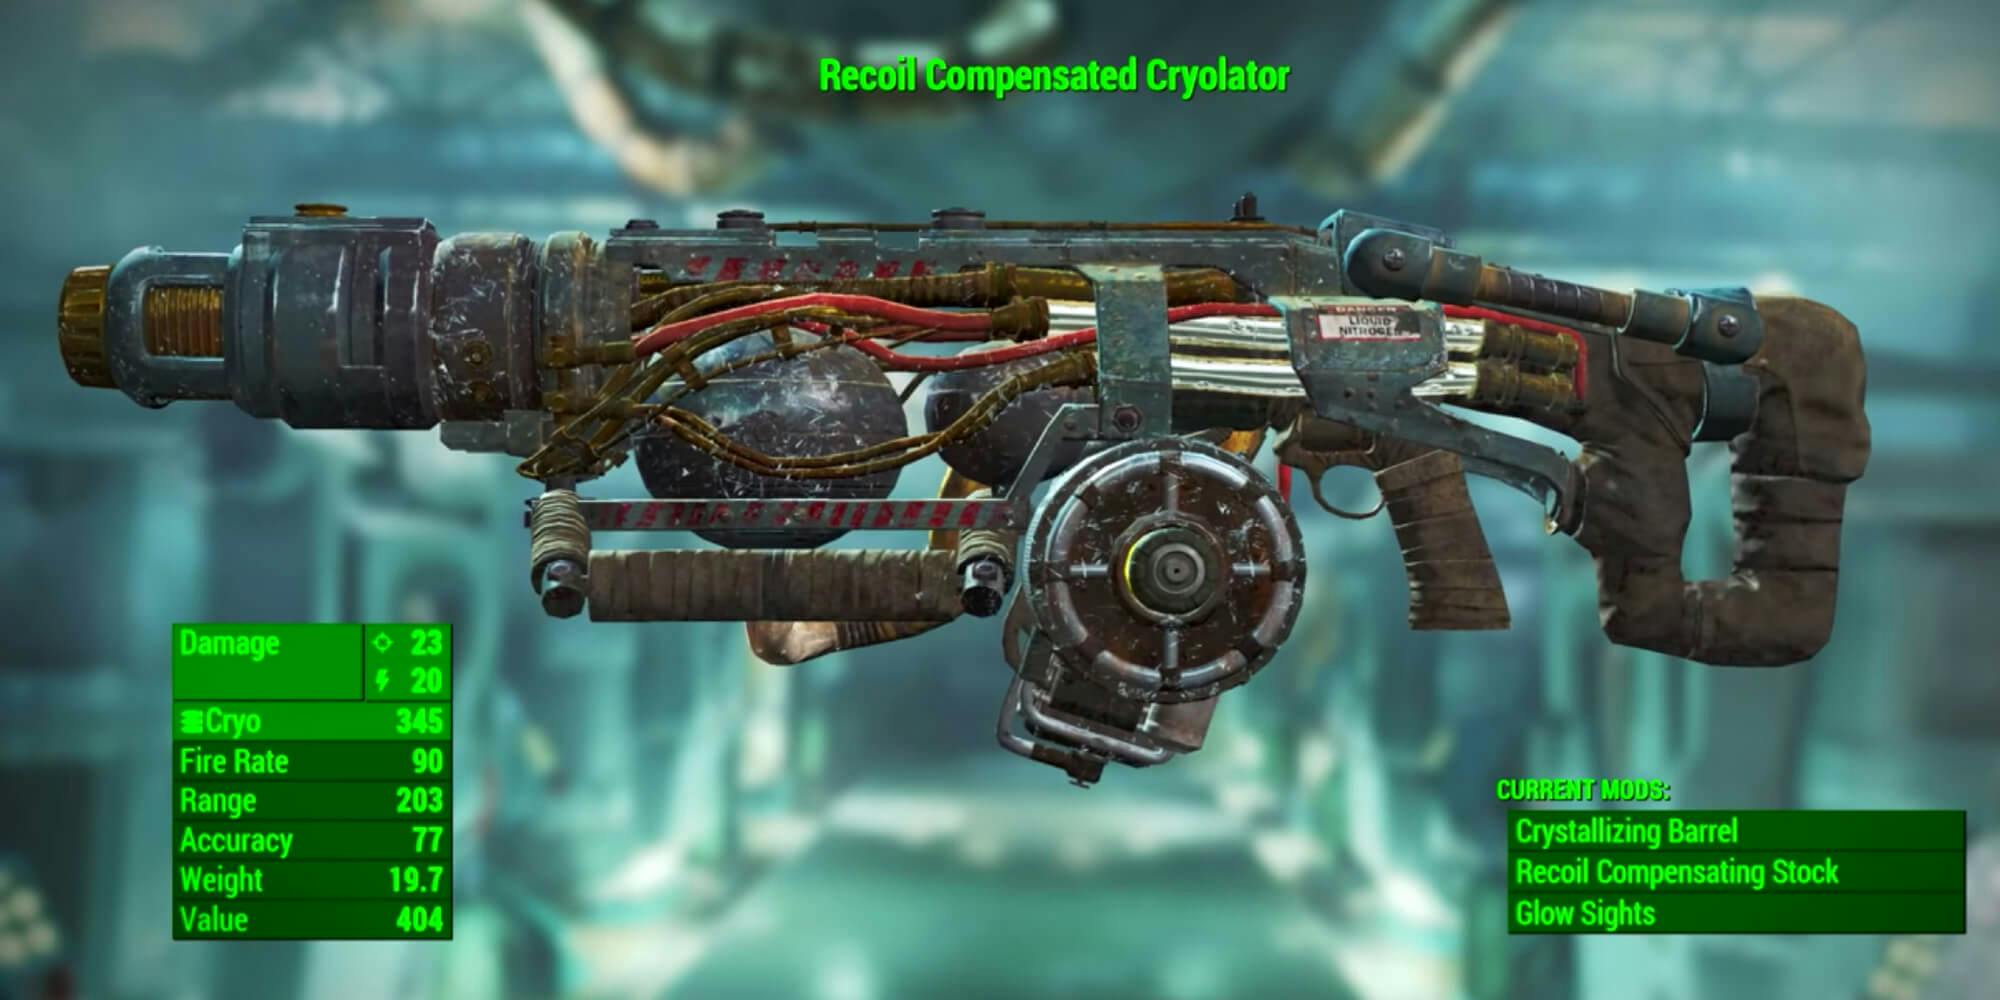 Fallout 4 weapons - Cryolator